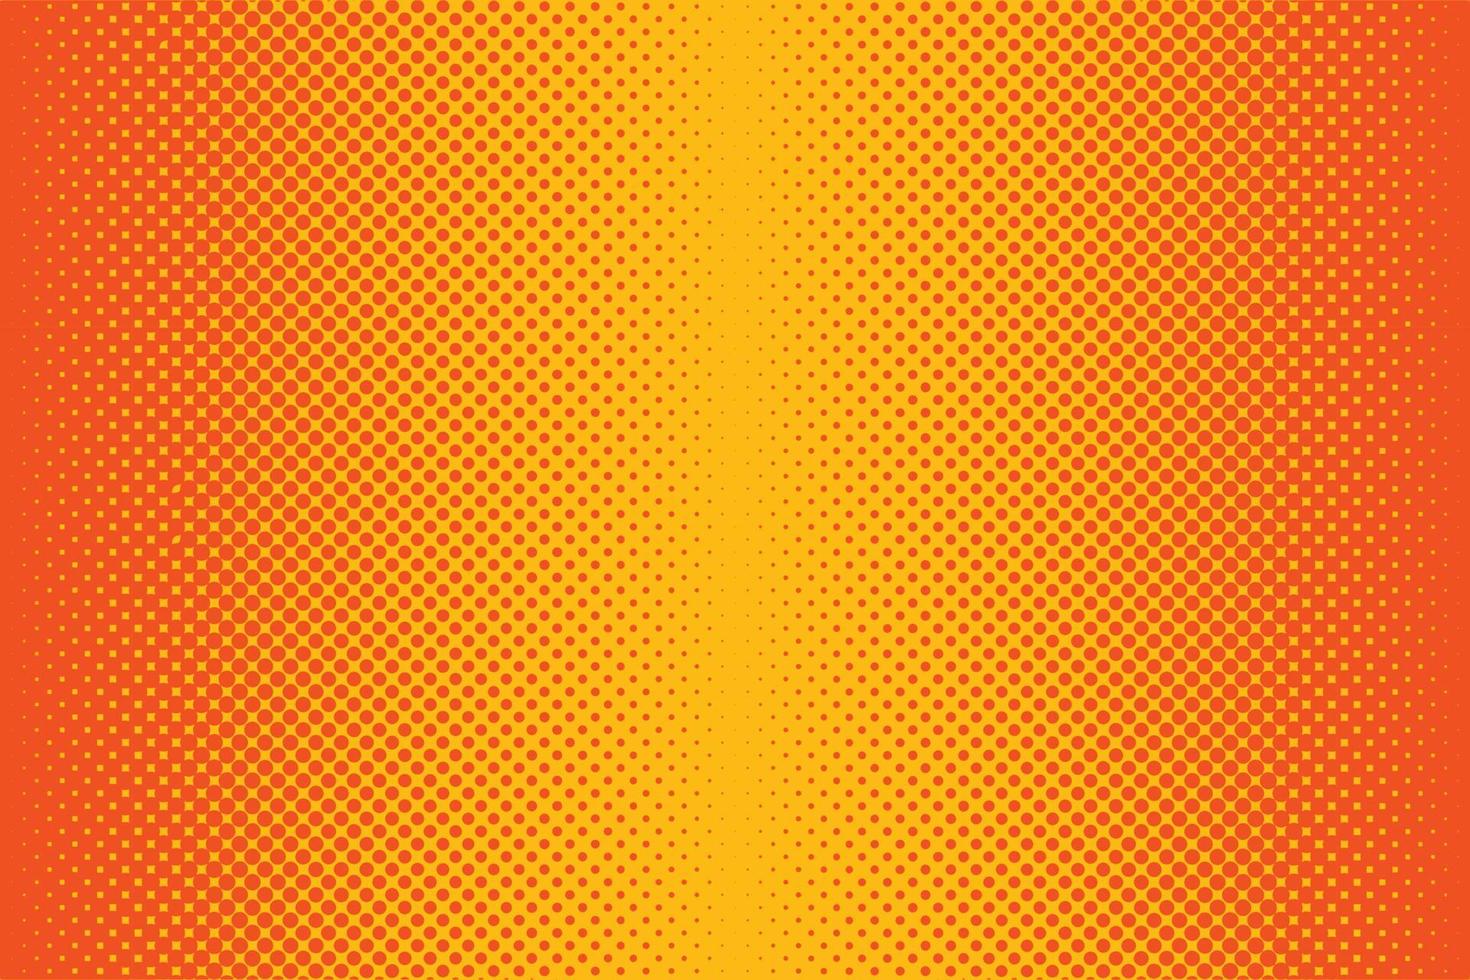 A yellow and orange background with a pattern of squares and dots. vector